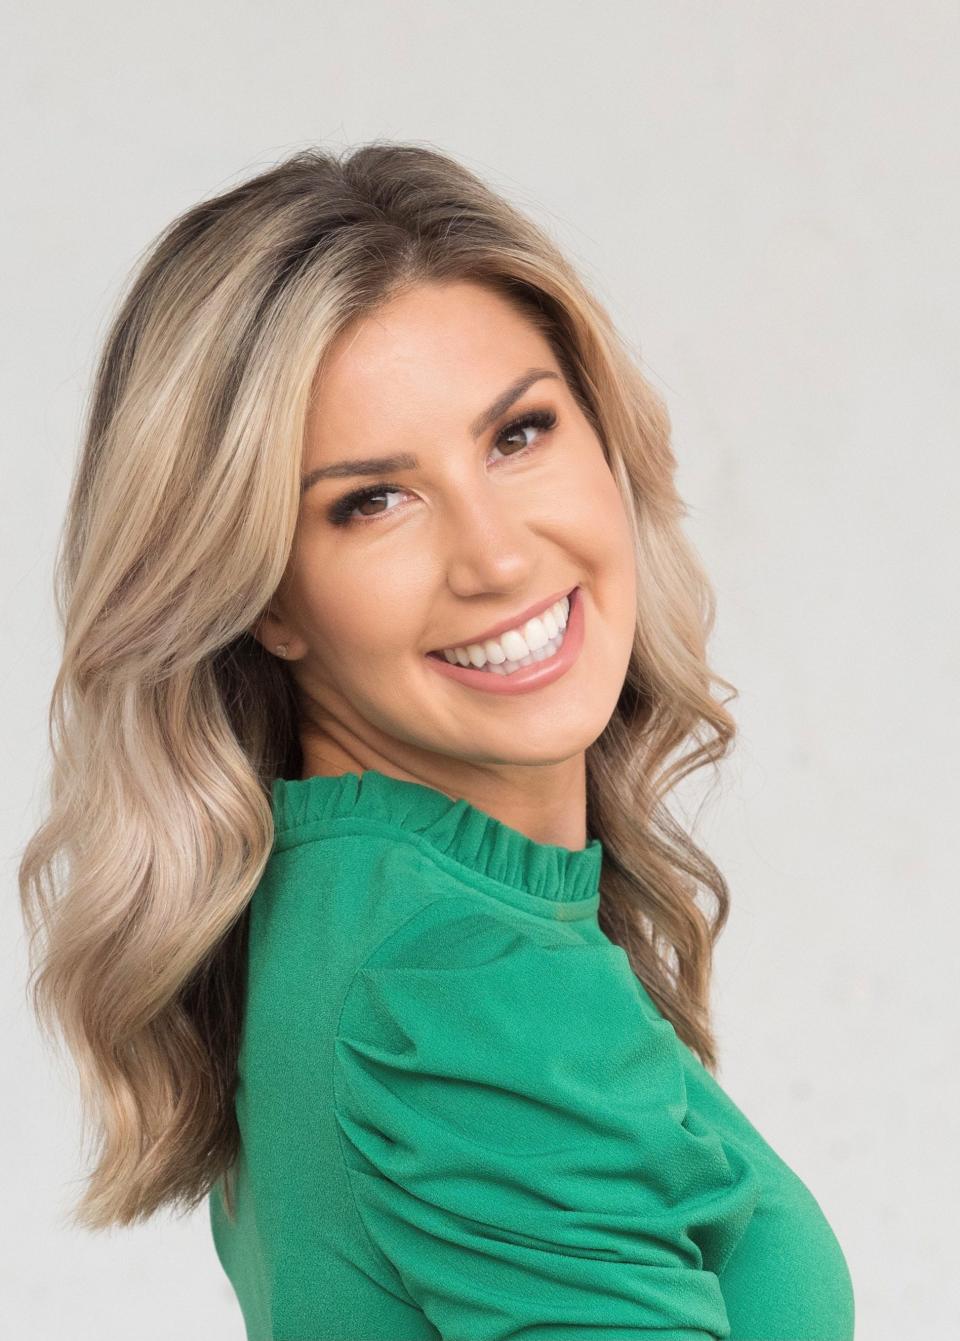 Annie Sabo, daughter of former Reds All-Star third-baseman Chris Sabo, has joined the Reds broadcast team.